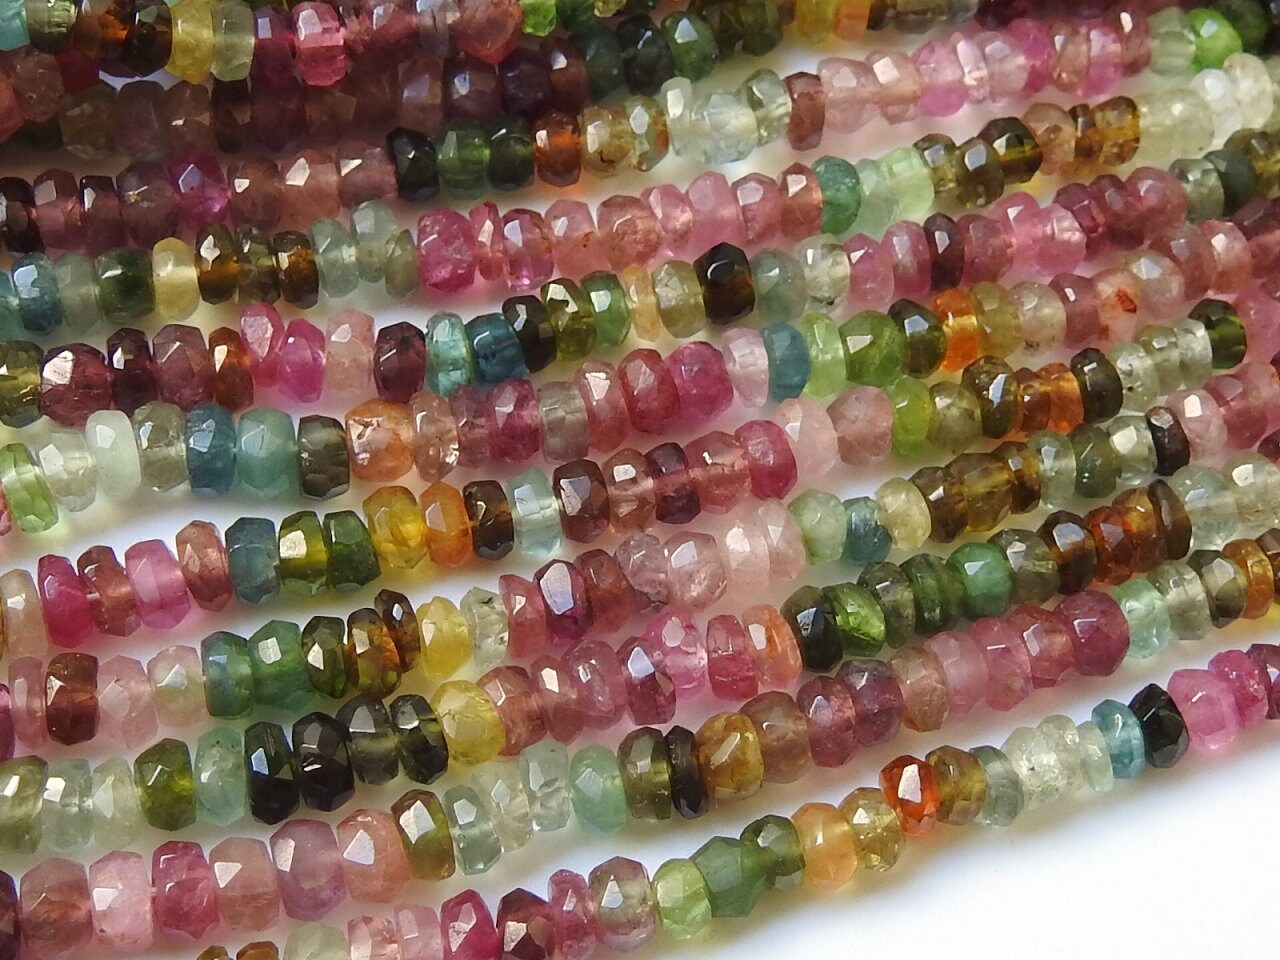 Tourmaline Faceted Roundel Bead,Multi Shaded,Loose Stone,Handmade,Necklace,Wholesaler,Supplies,New Arrival 100%Natural PME(B13) | Save 33% - Rajasthan Living 16